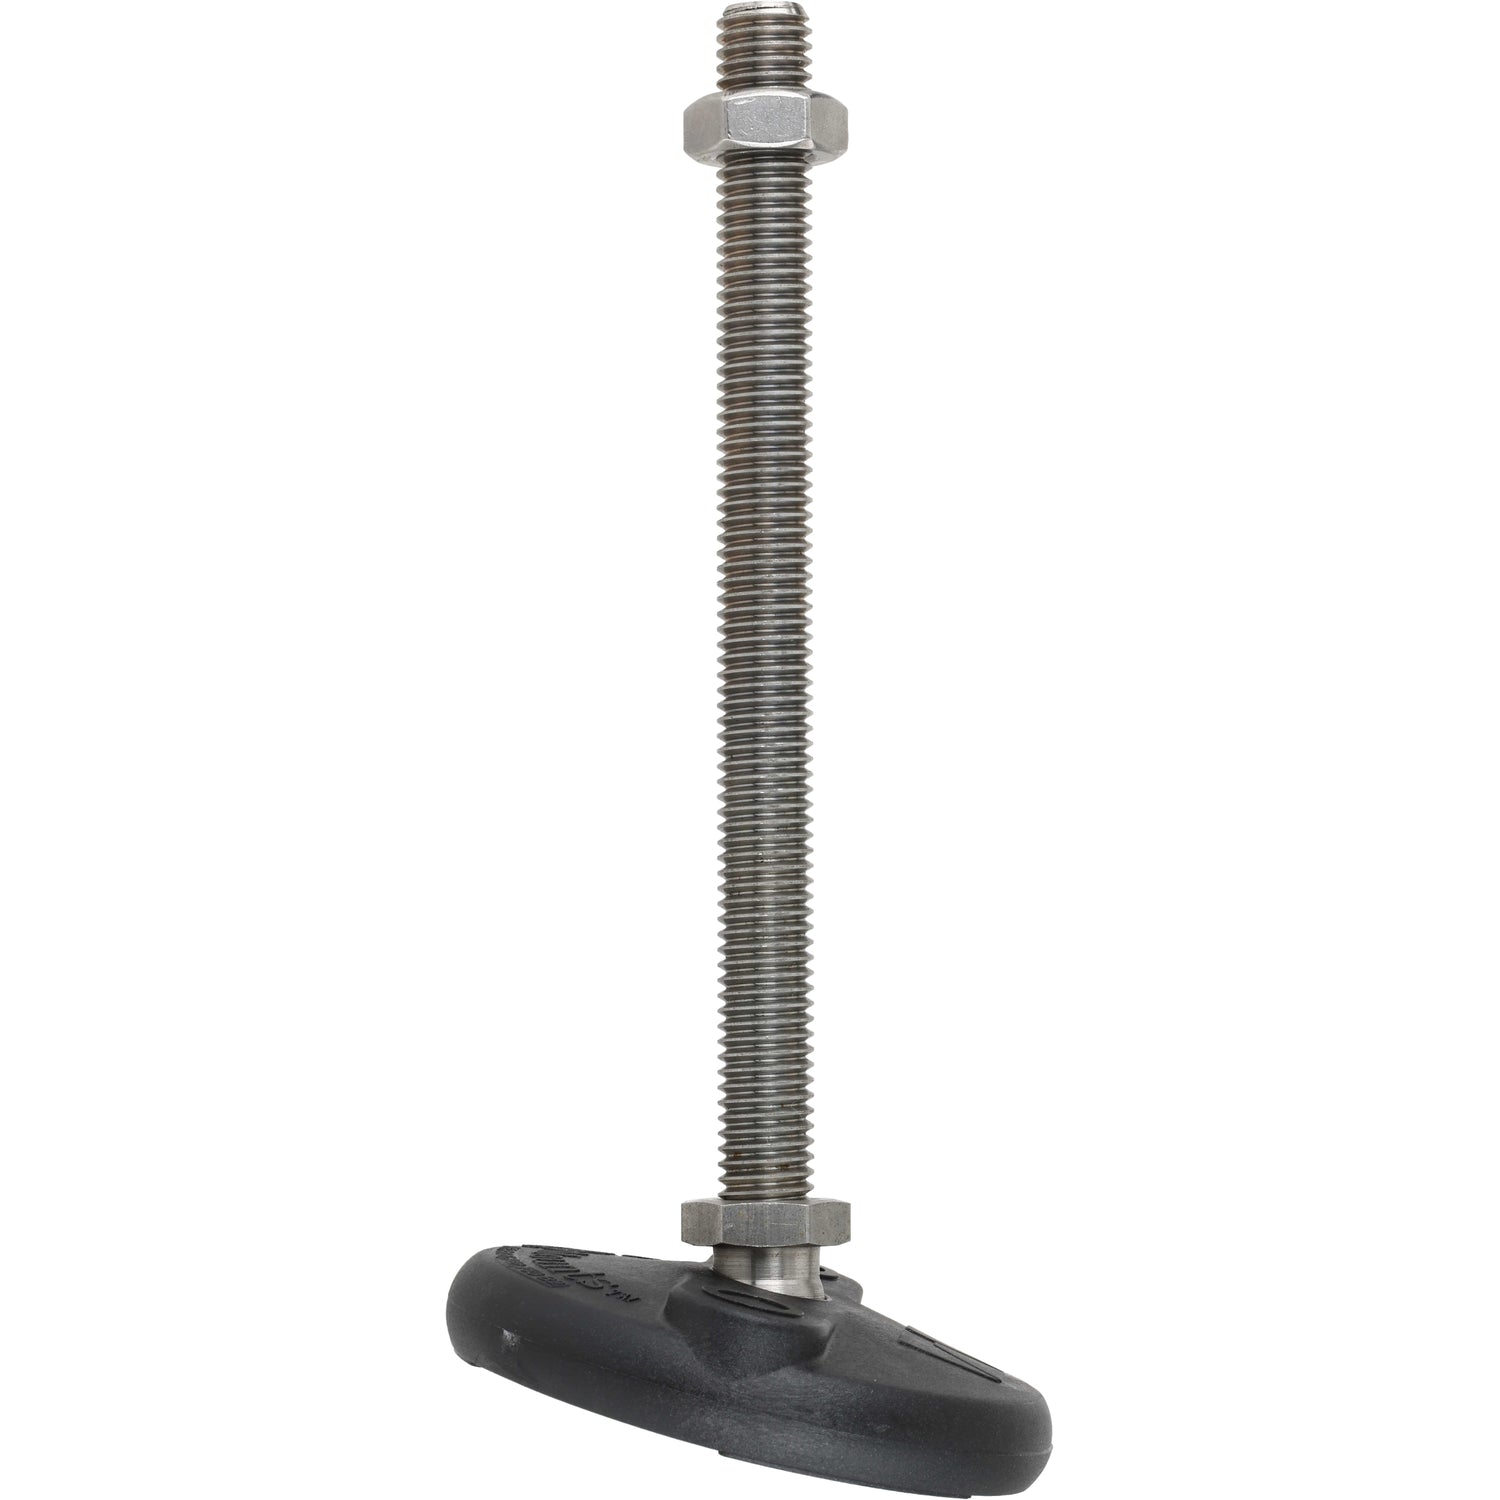 Threaded stainless steel post with stainless steel hex nut threaded on top, pressed into a tilted, circular black plastic base.  Shown on a white background. 